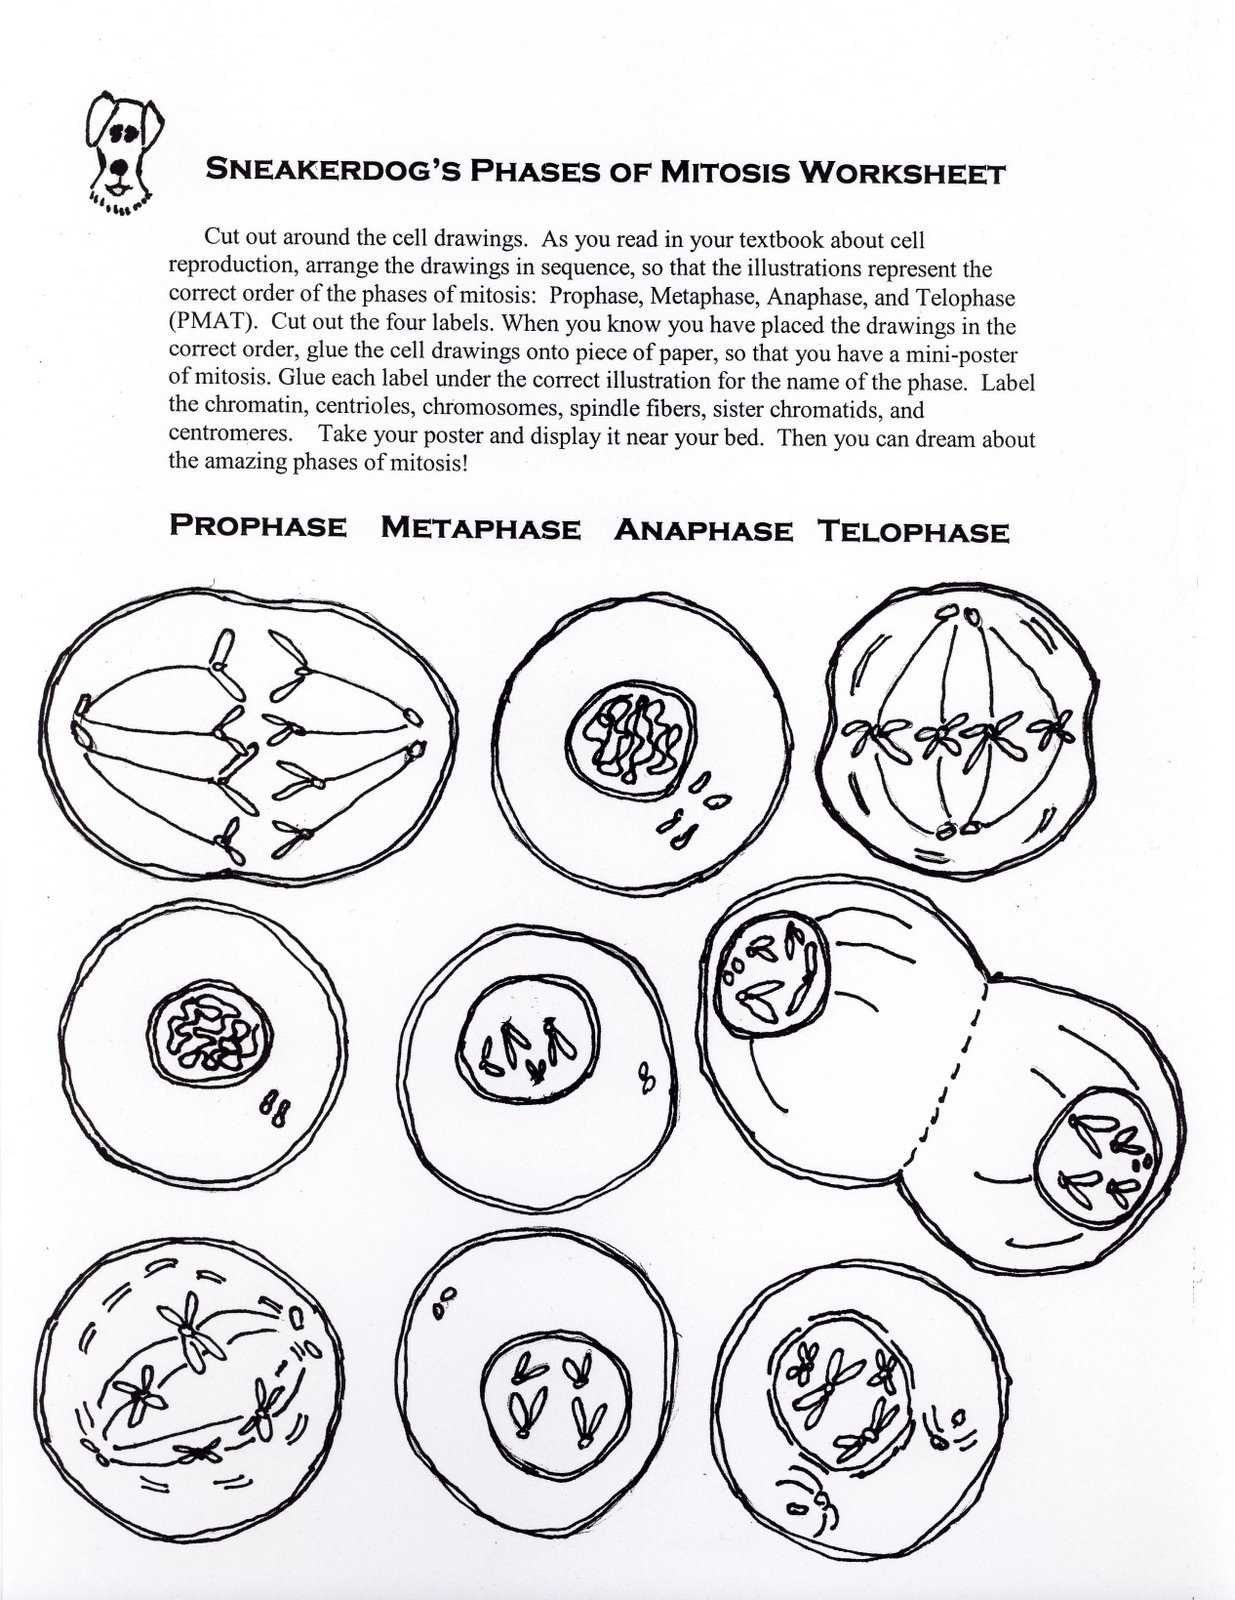 Onion Cell Mitosis Worksheet Answers as Well as Cell Division Worksheet 5b A9b Battk